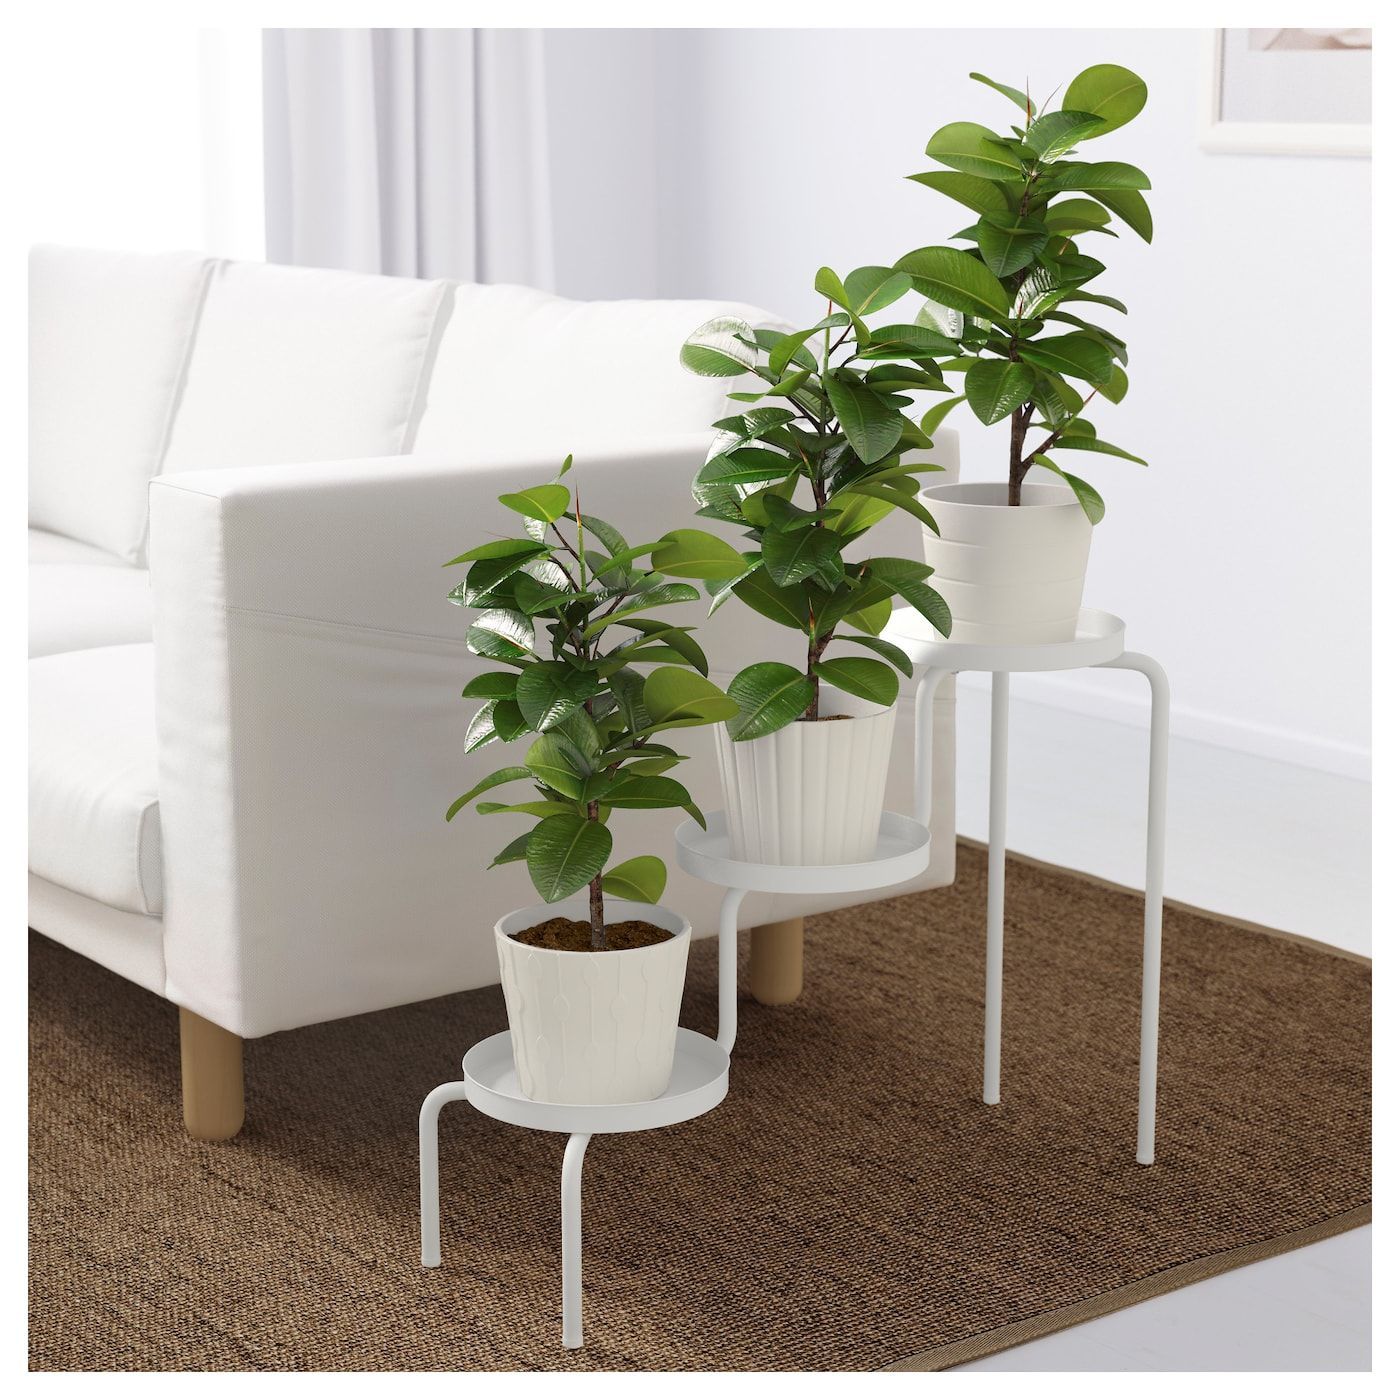 IKEA PS 2014 Plant stand - white indoor/outdoor, white - IKEA -   18 pidestall plants Stand ideas